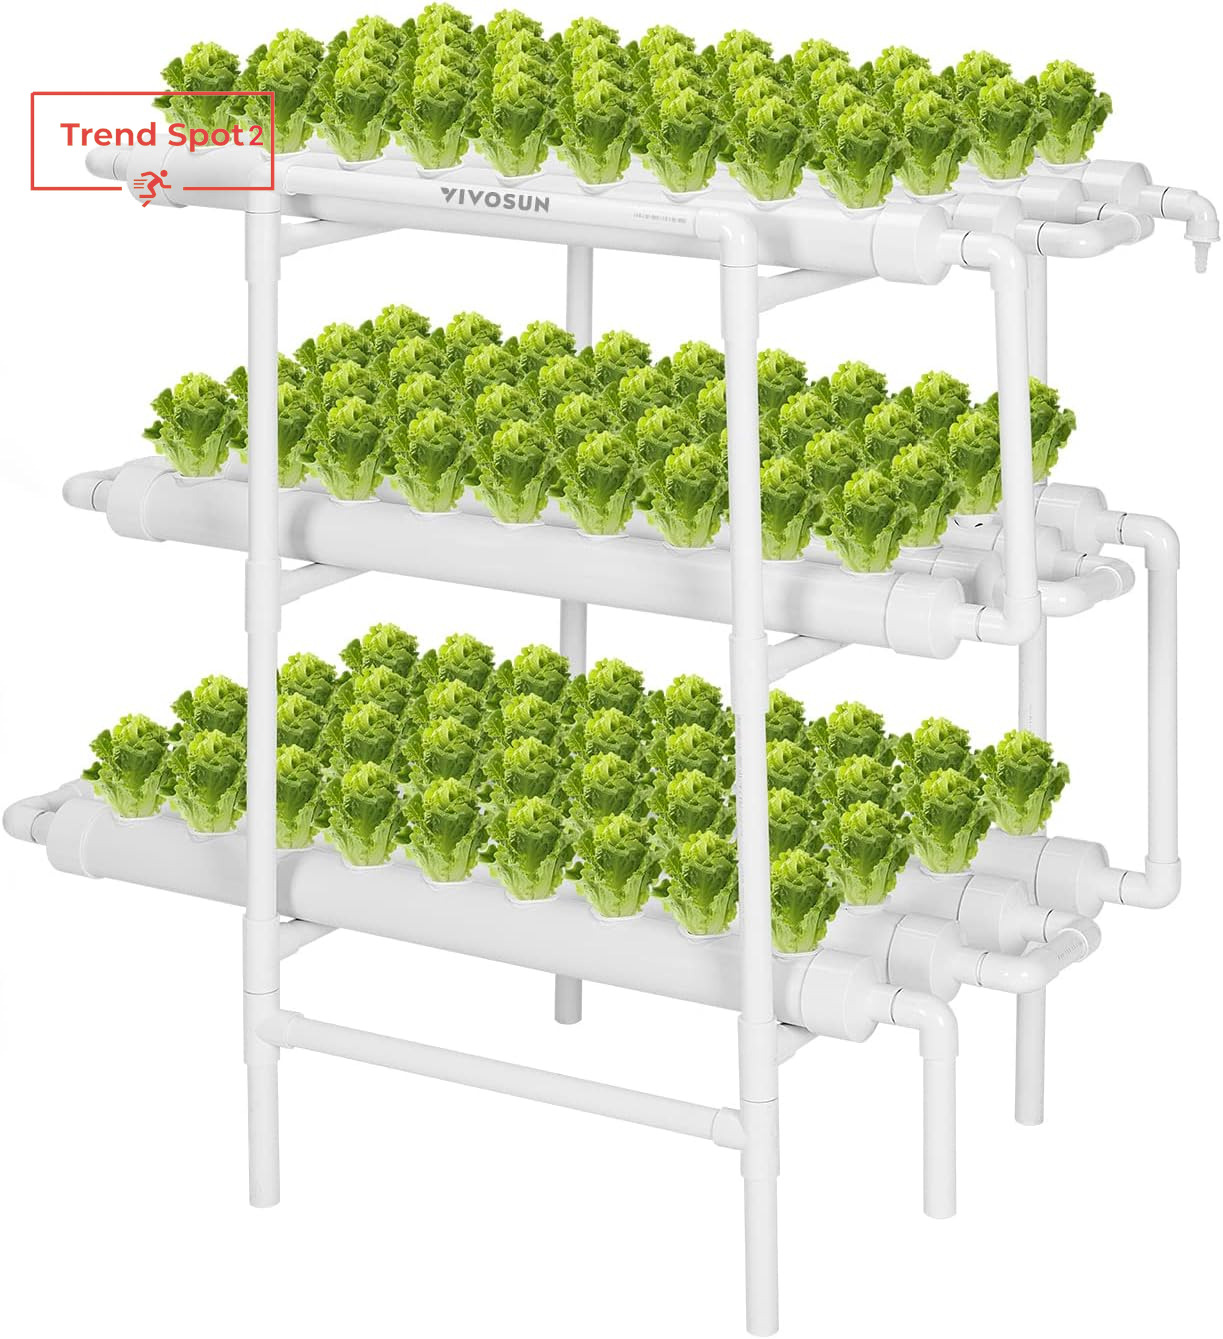 Hydroponics Growing System 108 Plant Sites, 3 Layers 12 Food-Grade PVC-U Pipes G